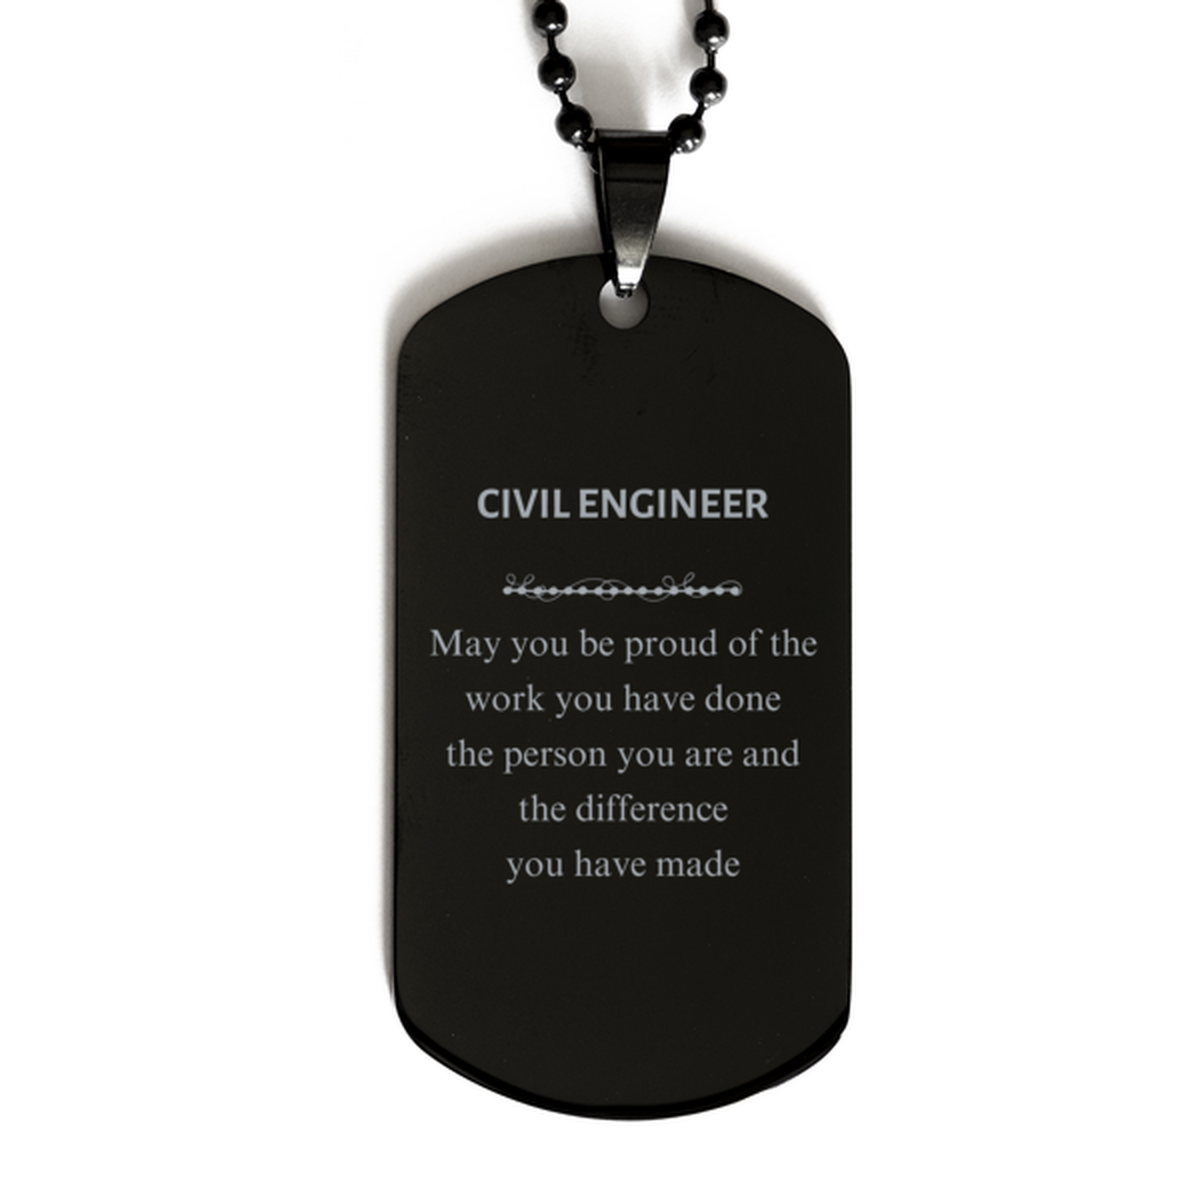 Civil Engineer May you be proud of the work you have done, Retirement Civil Engineer Black Dog Tag for Colleague Appreciation Gifts Amazing for Civil Engineer